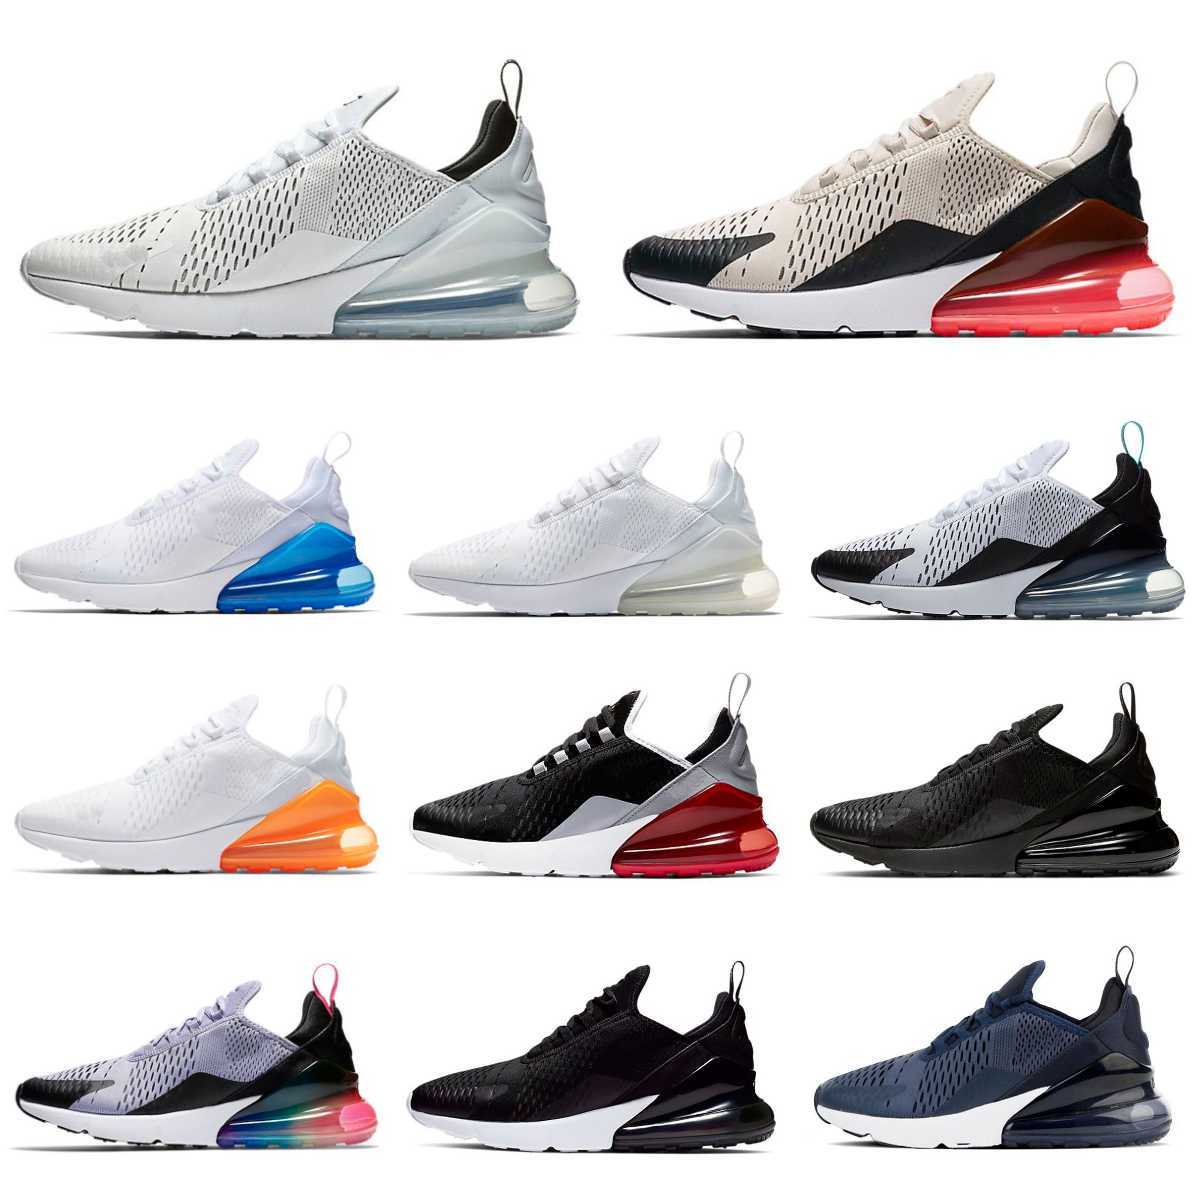 

Max 270 Trainers Men Women Running Shoes Designers 270s Triple Black White Dusty Cactus University Red Brown Barely Rose Anthracite Airmaxs Outdoor Sports Sneakers, T07